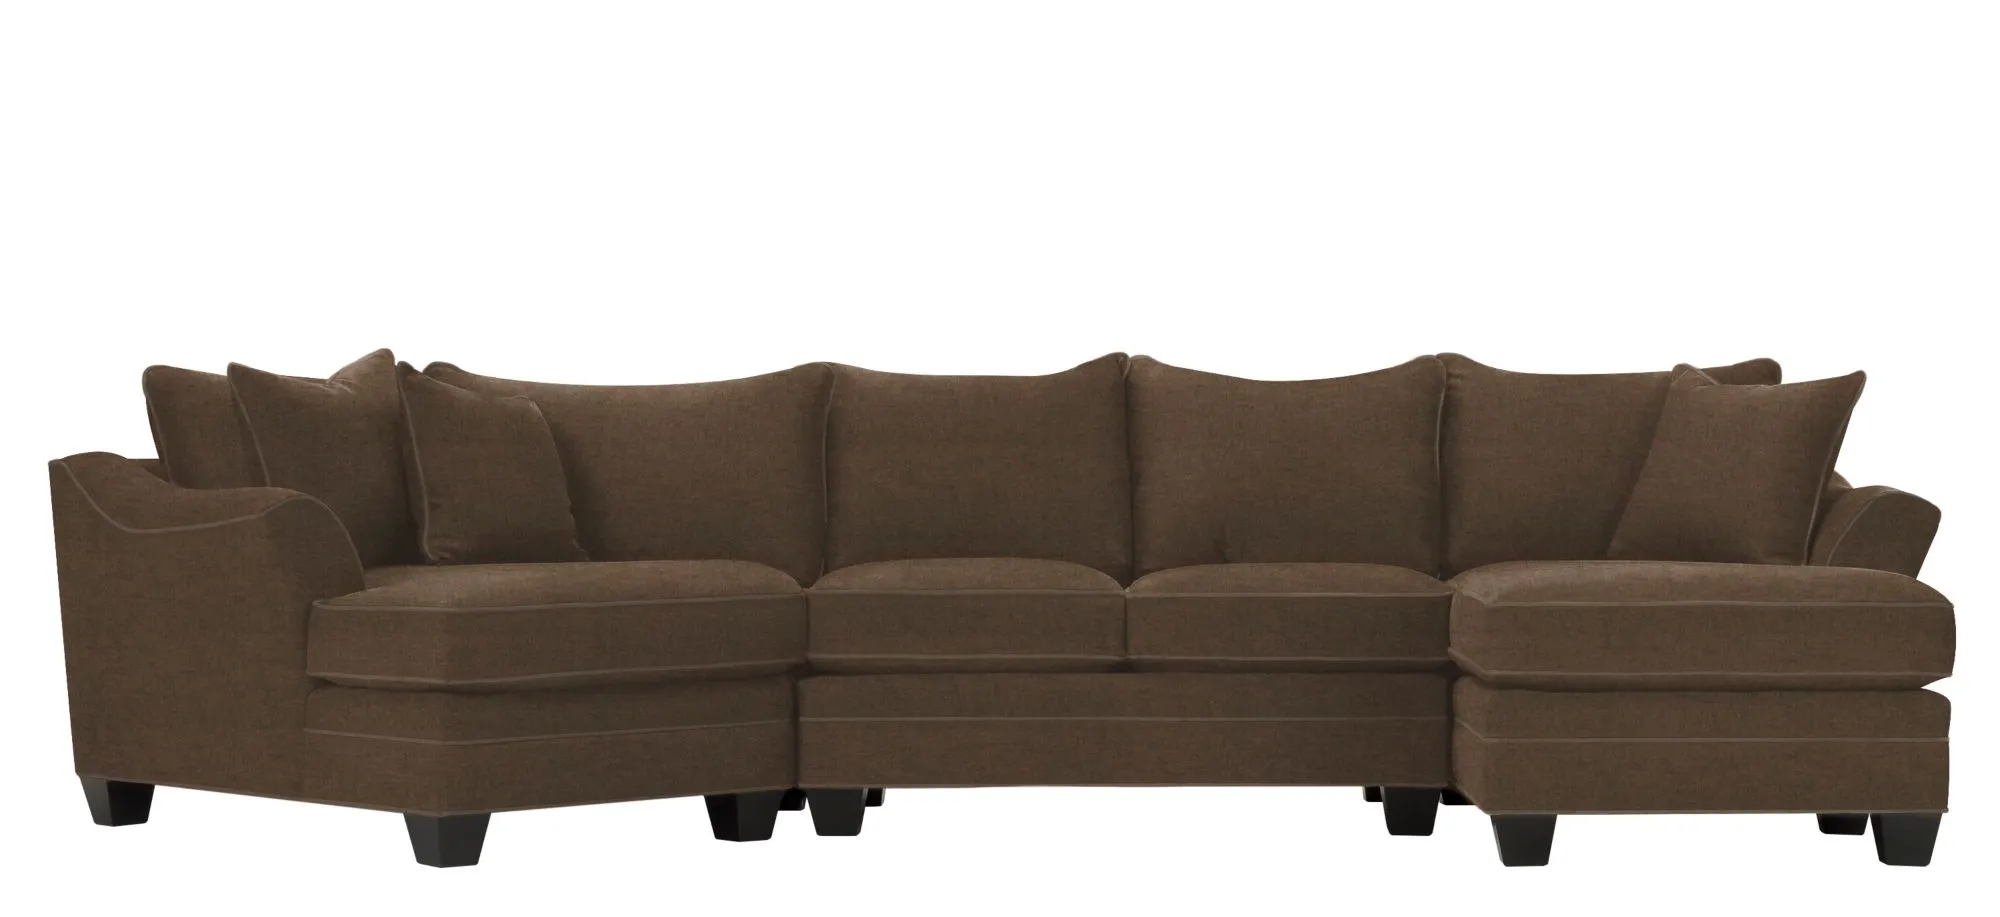 Foresthill 3-pc. Right Hand Facing Sectional Sofa in Santa Rosa Taupe by H.M. Richards